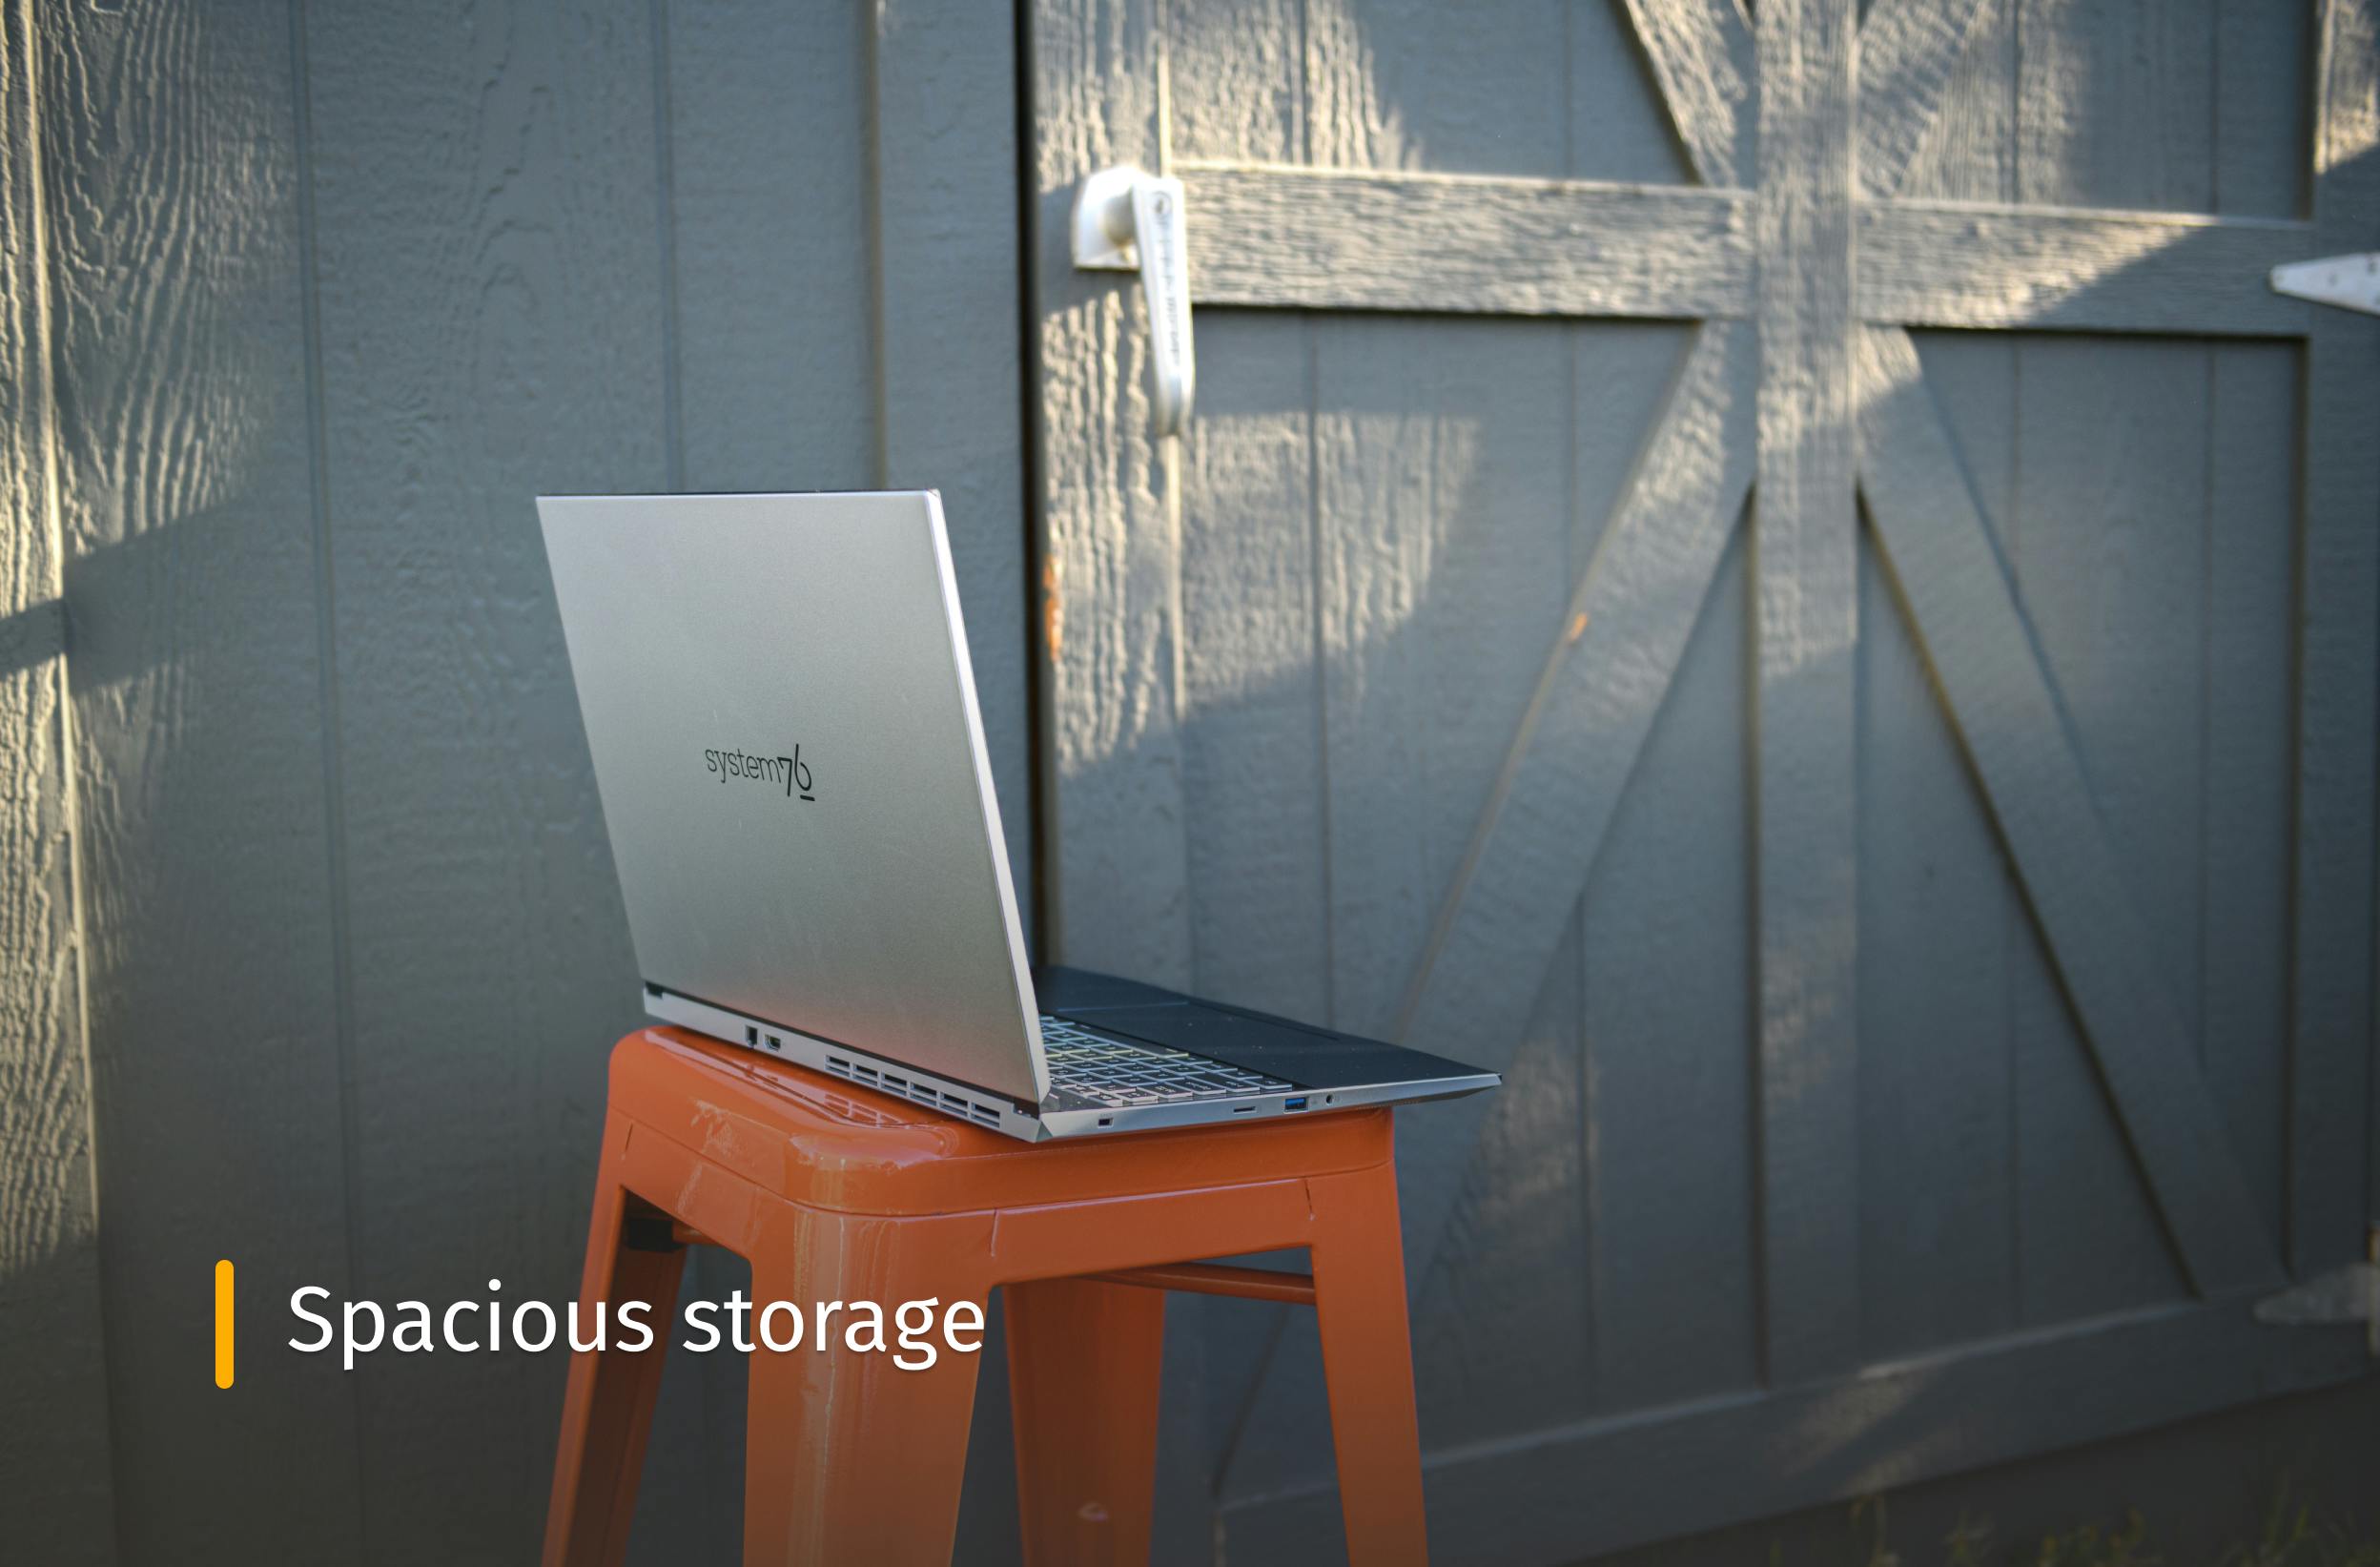 Darter Pro next to an outside storage unit and text that reads "Spacious storage"